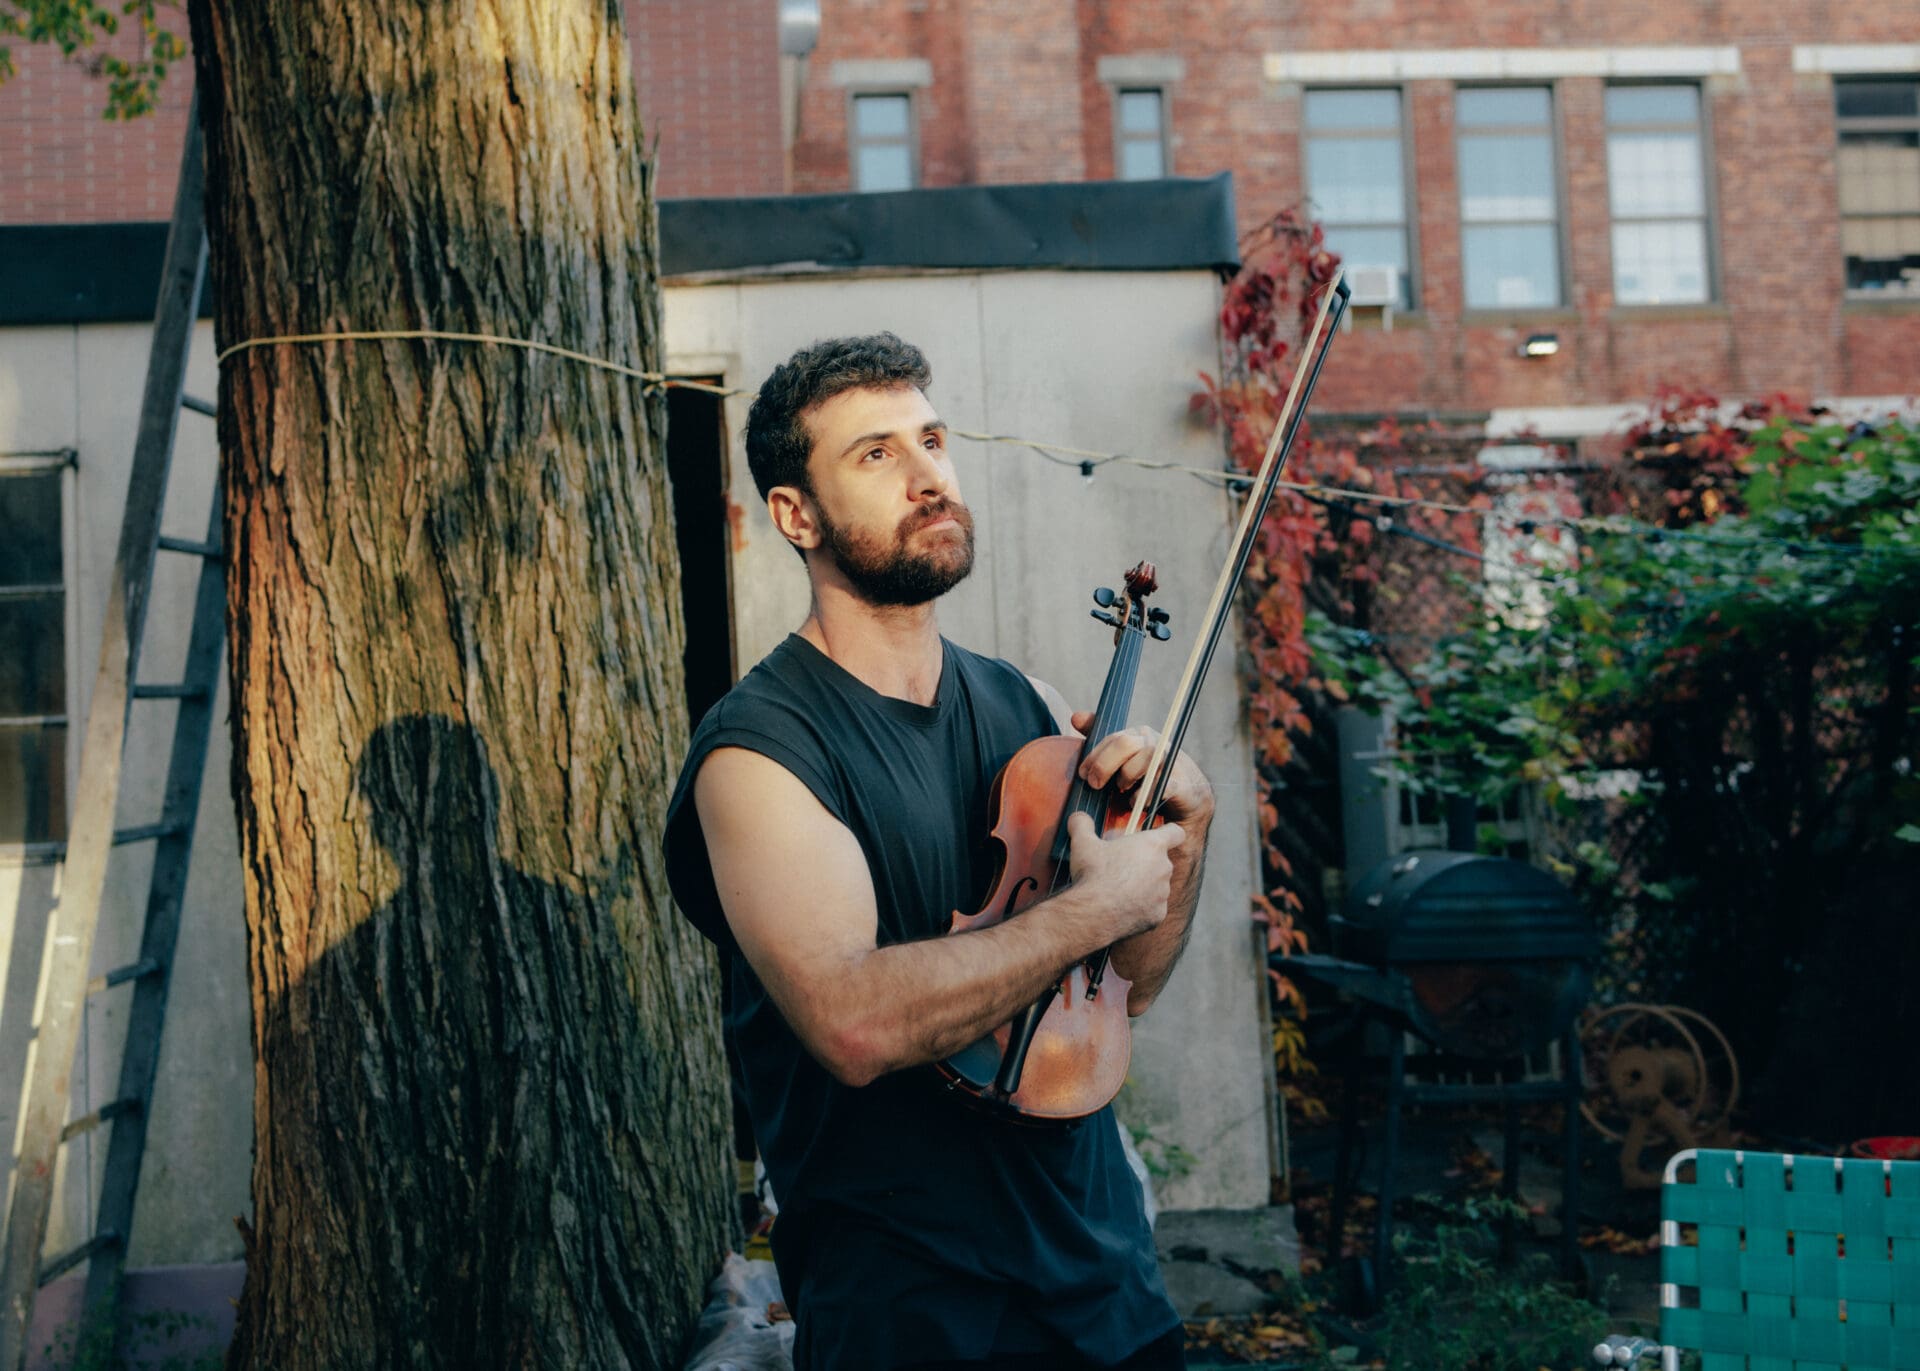 An interivew with Haig Papazian | the artist holds a violin